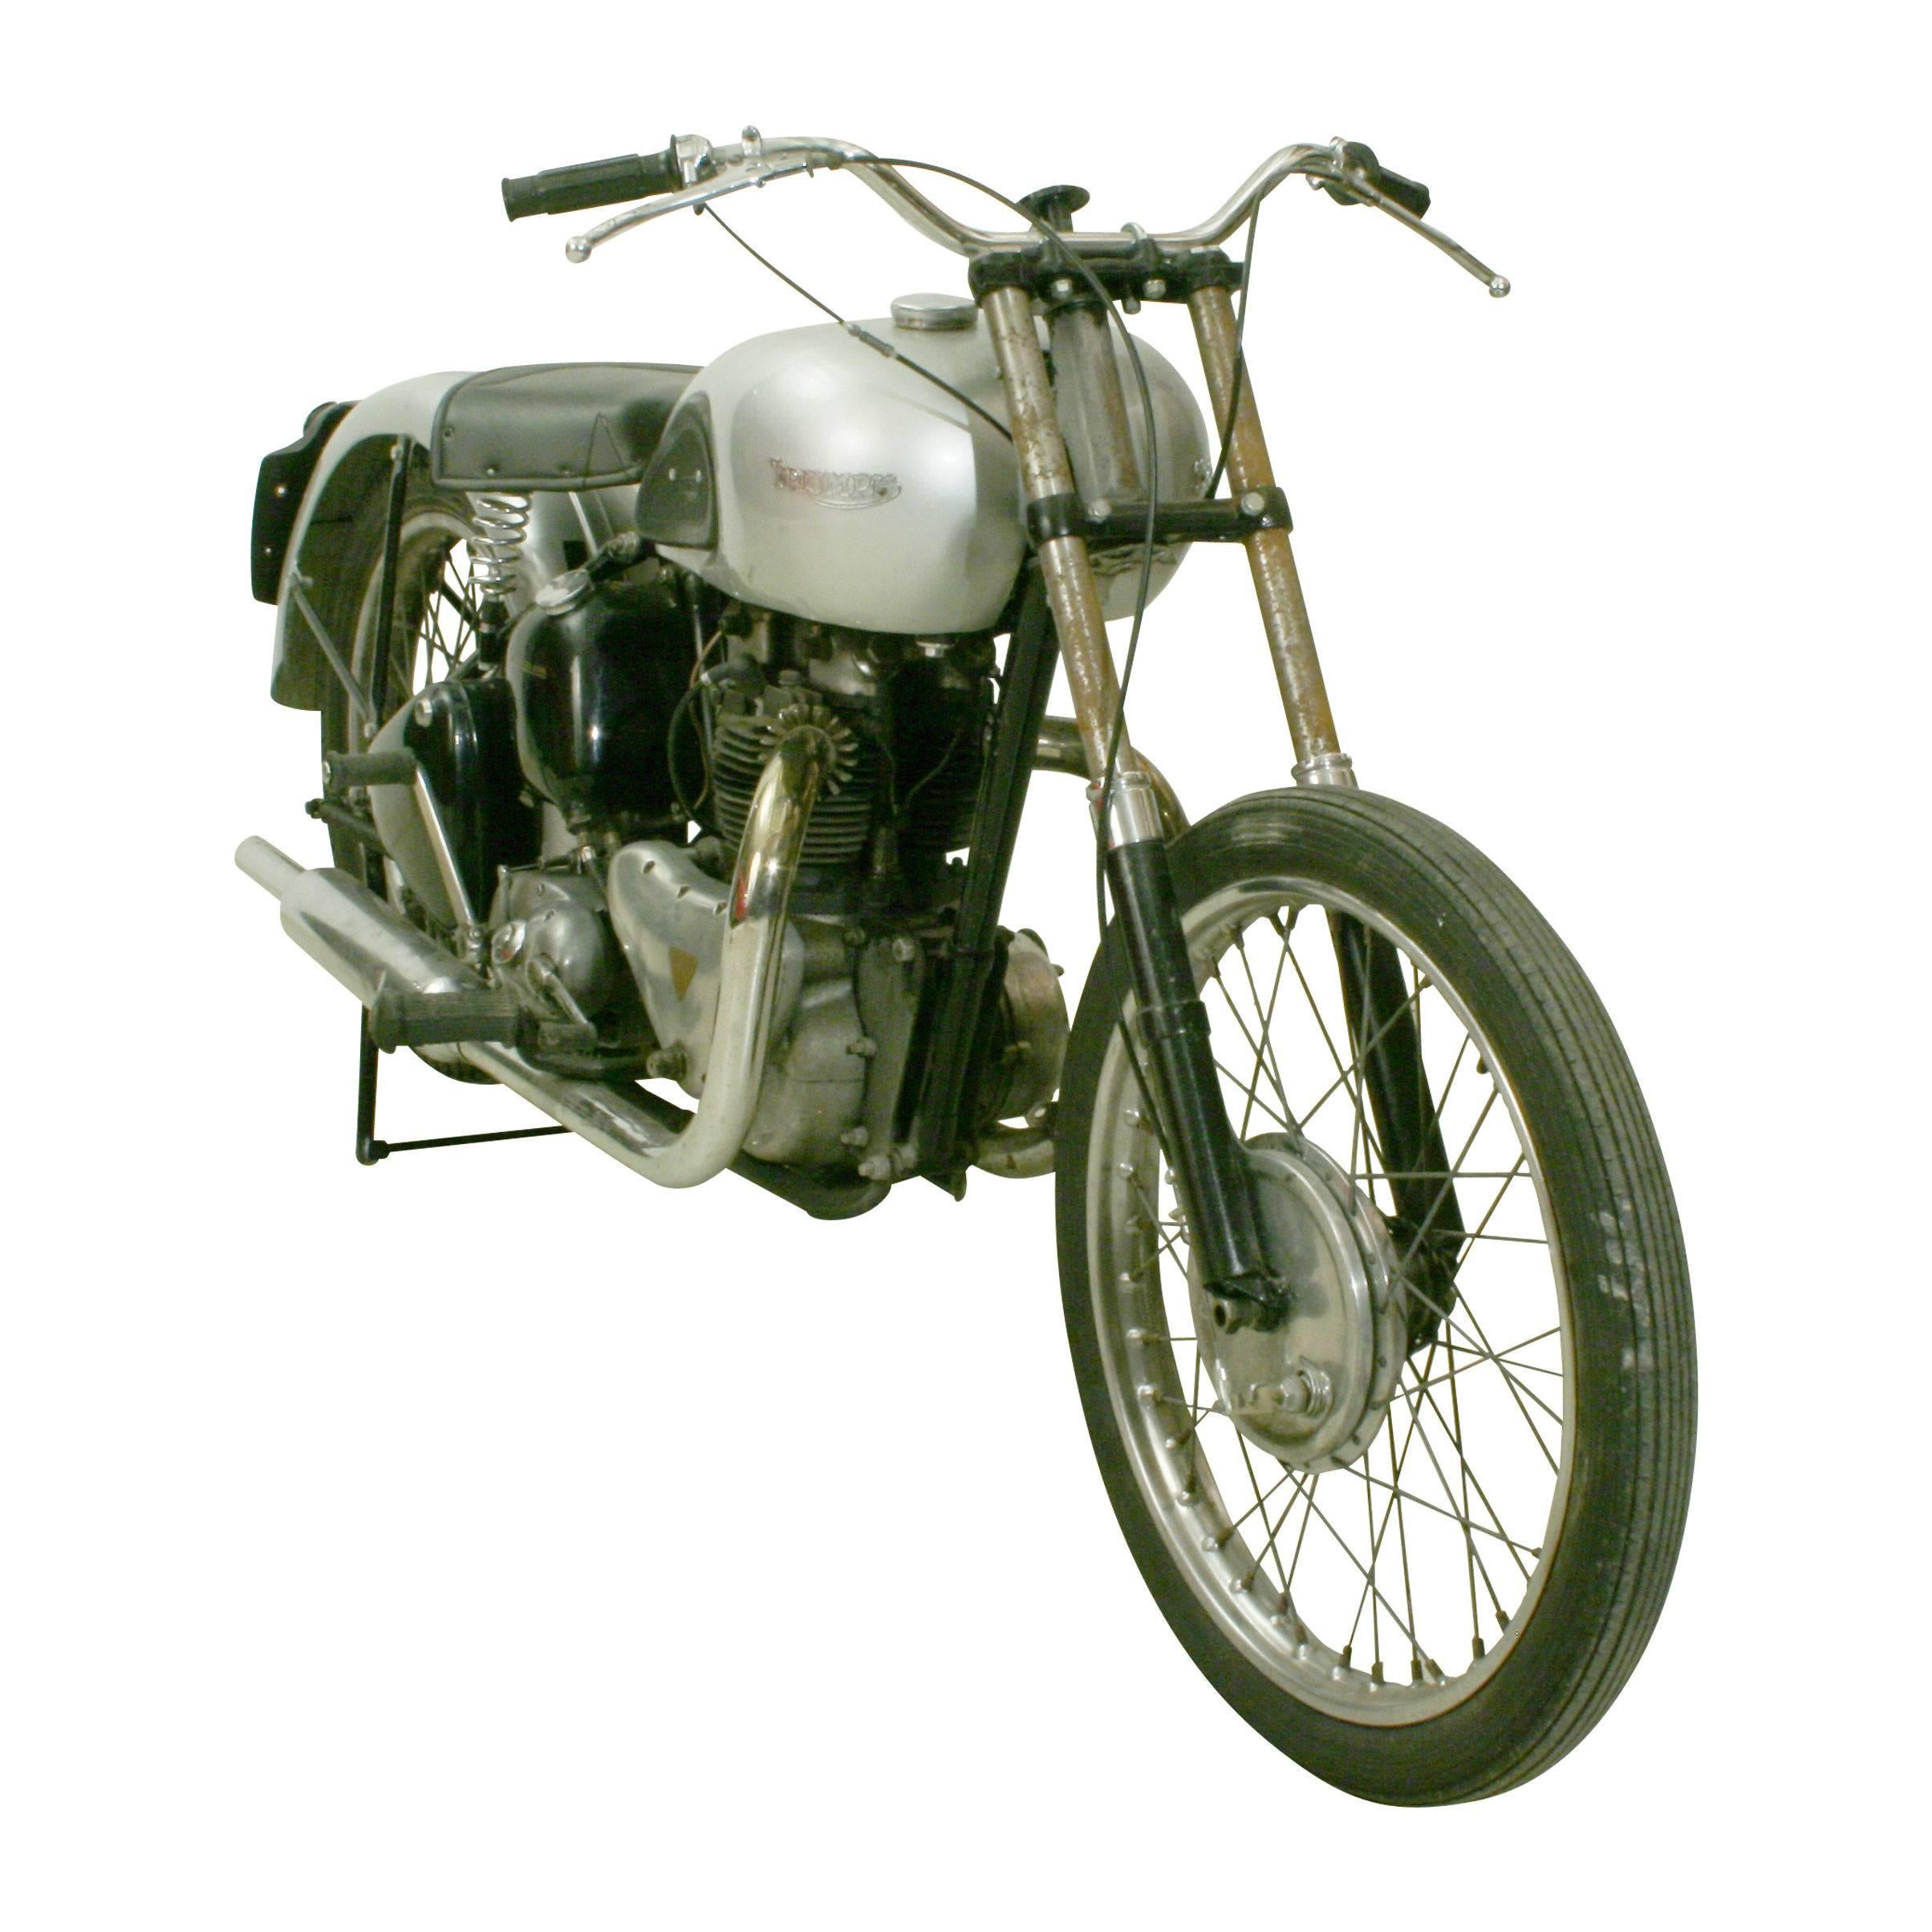 English Triumph Speed Twin Motorcycle